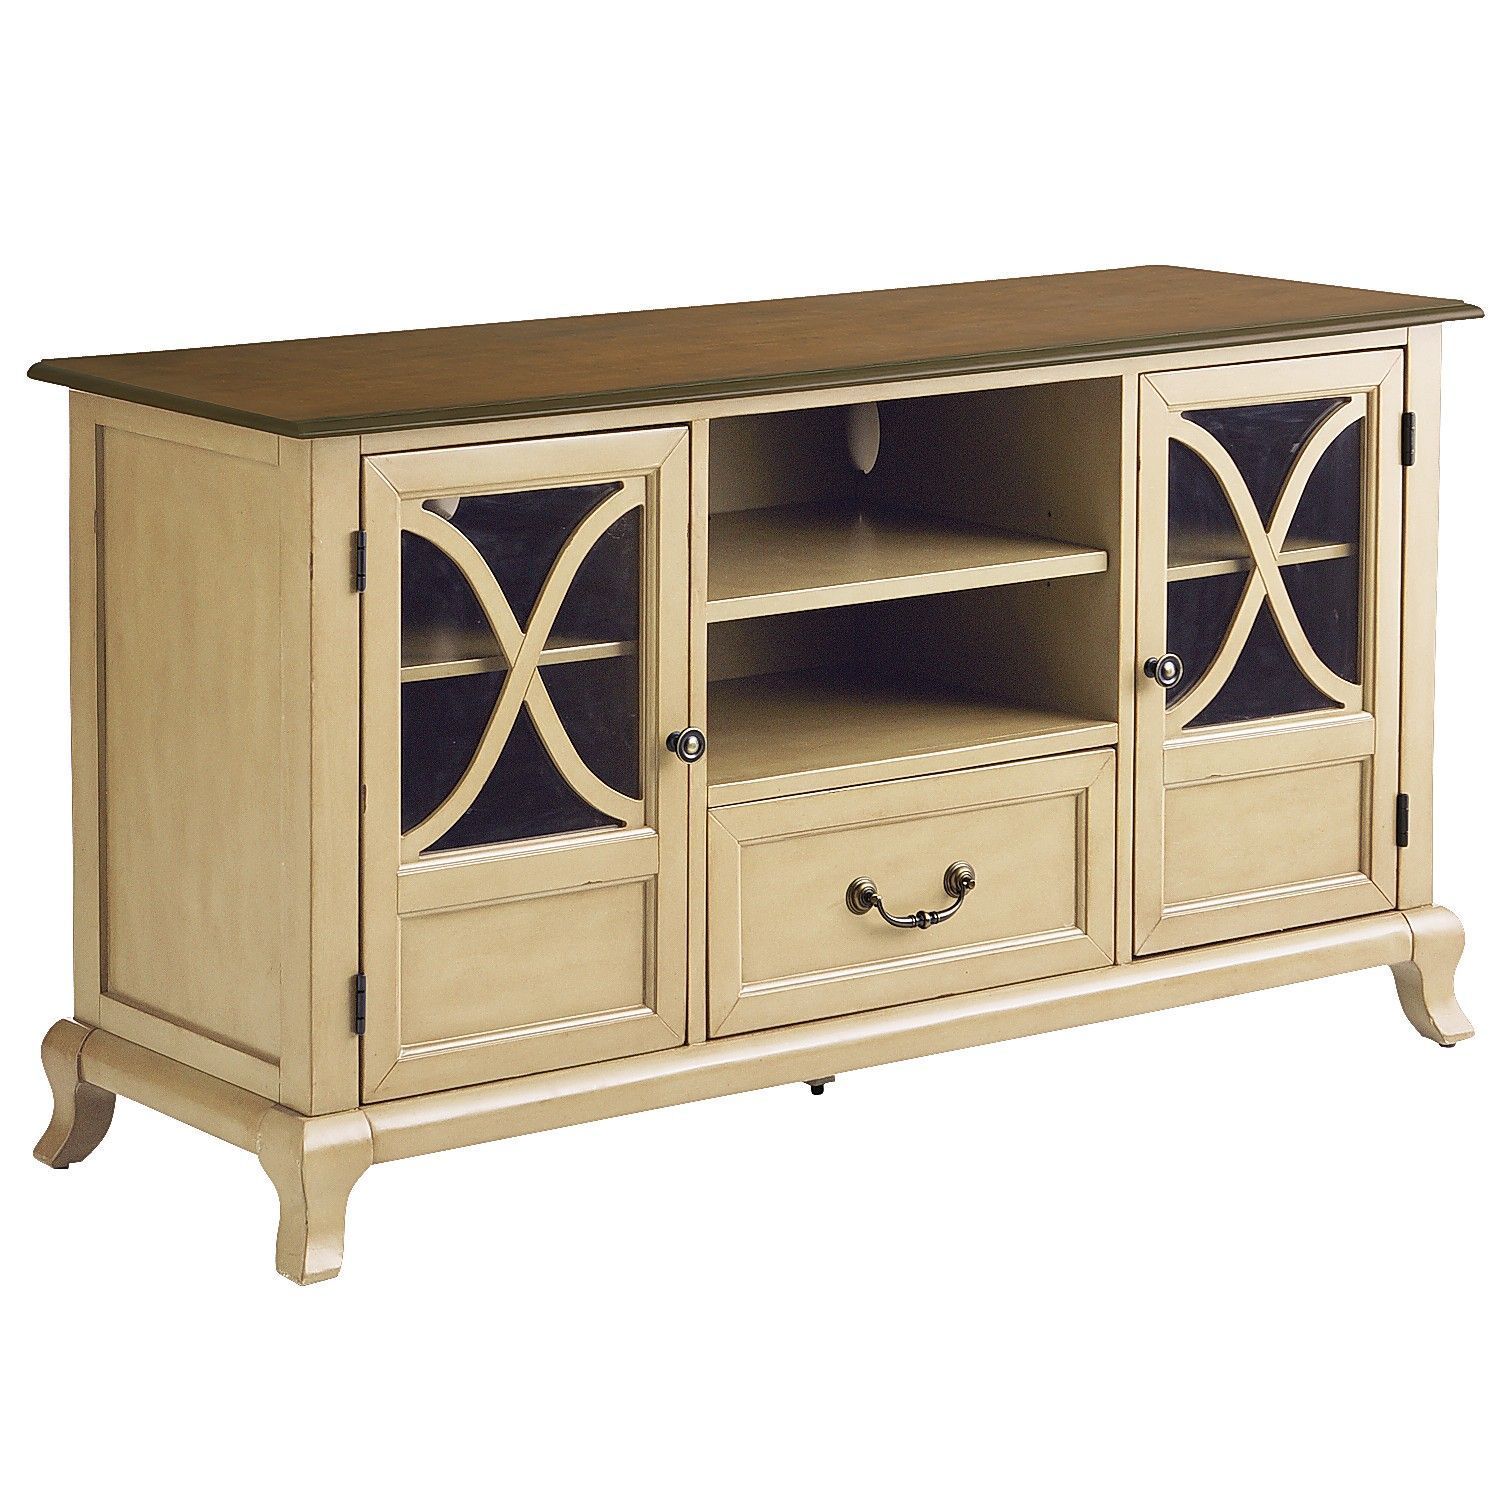 Marchella Antique Ivory 52" Tv Stand | Products | Pinterest Pertaining To Annabelle Blue 70 Inch Tv Stands (View 7 of 30)